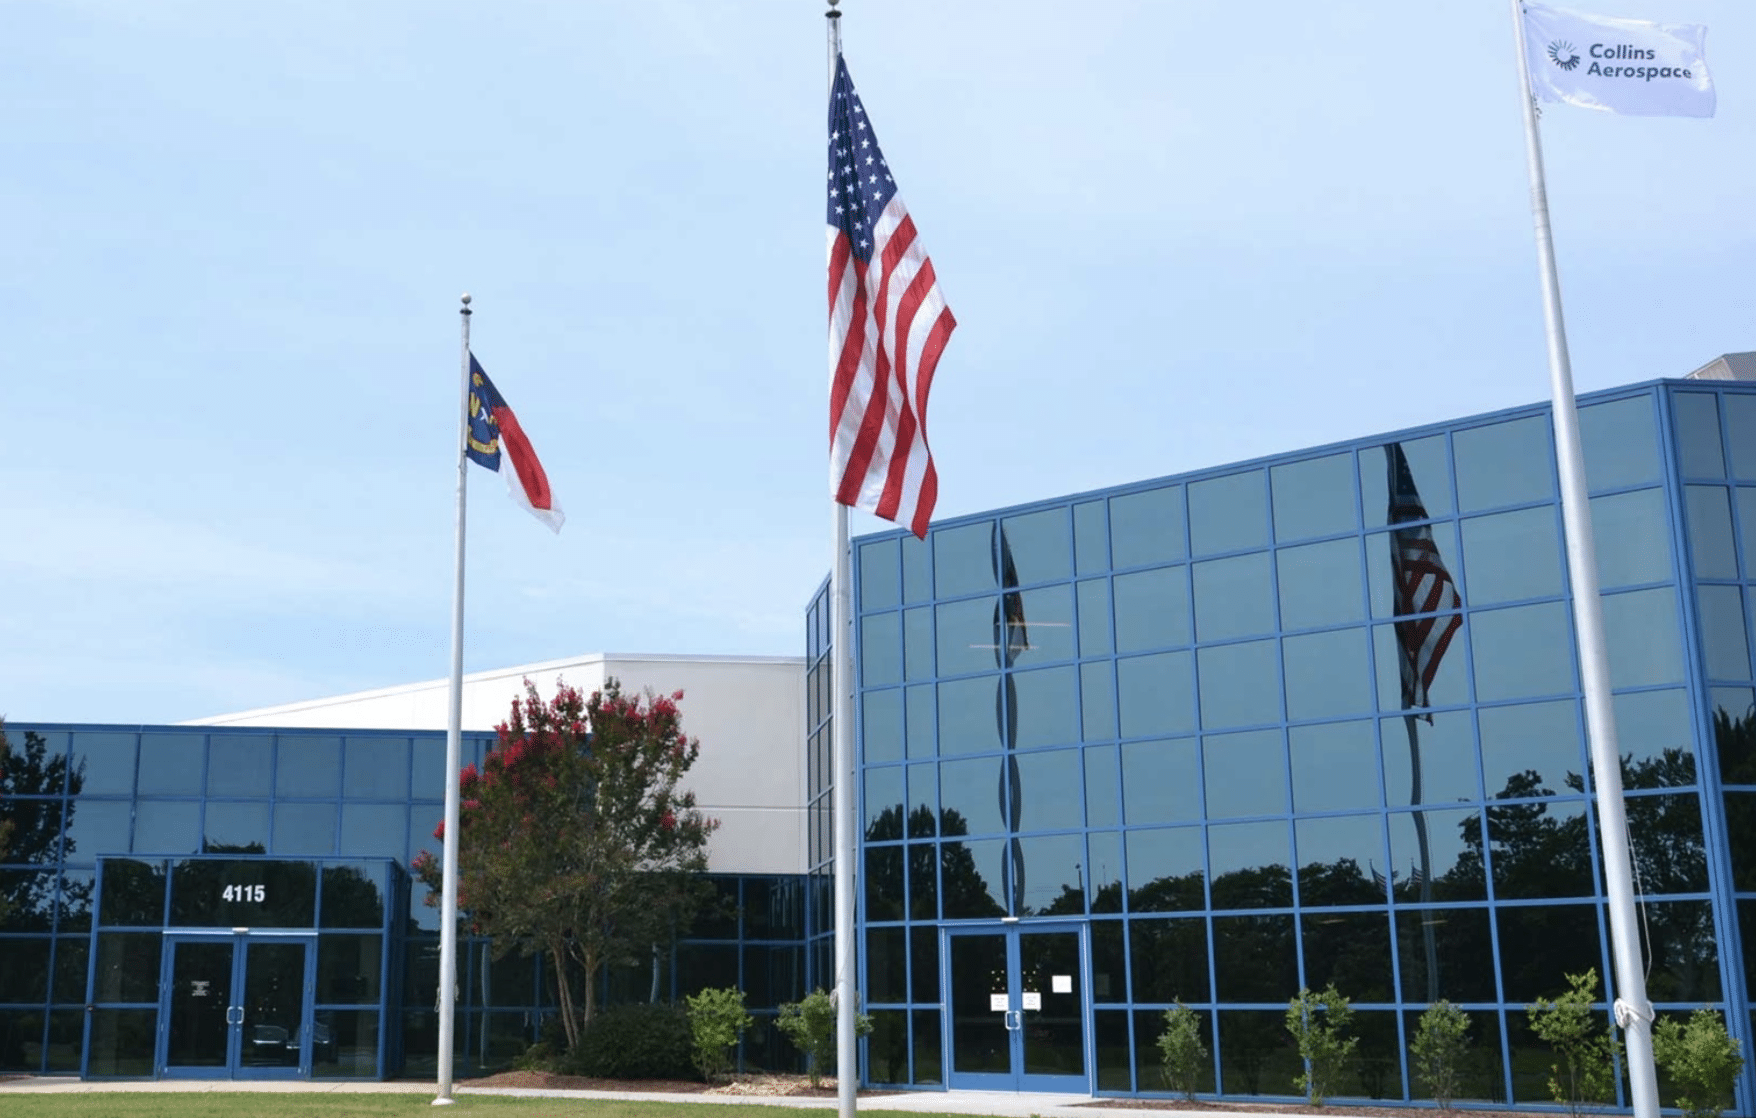 collins-aerospace-invests-30m-to-expand-global-repair-facility-in-monroe-n-c-aviation